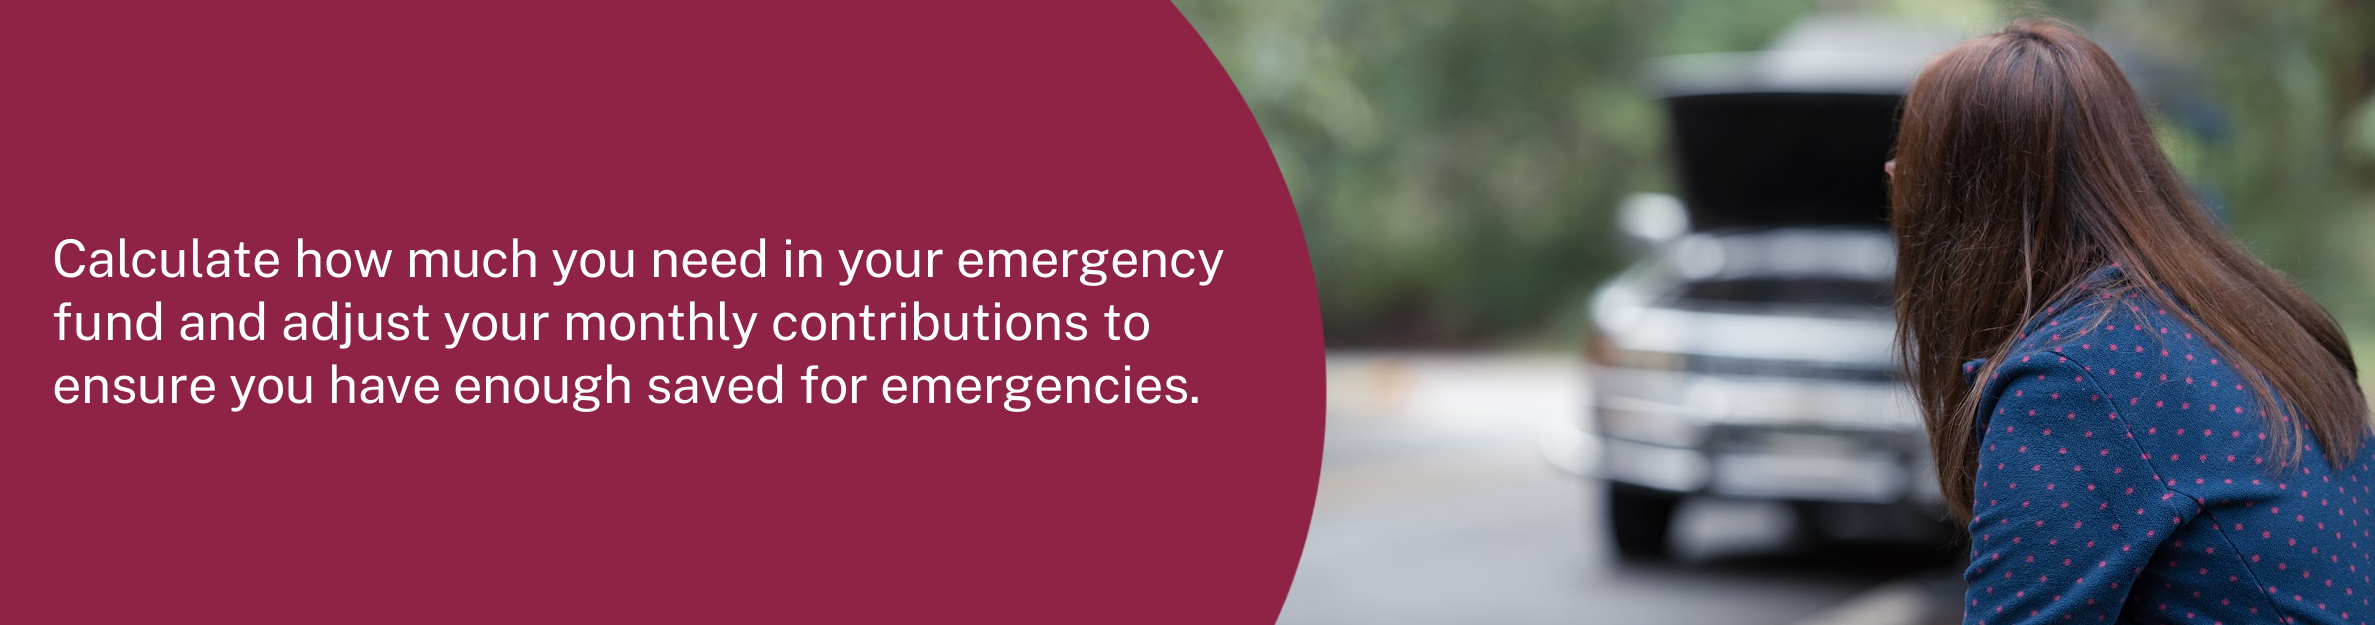 Photo: Woman by broken down pick up
Text: Calculate how much you need in your emergency fund and adjust your monthly contributions to ensure you have enough saved for emergencies.